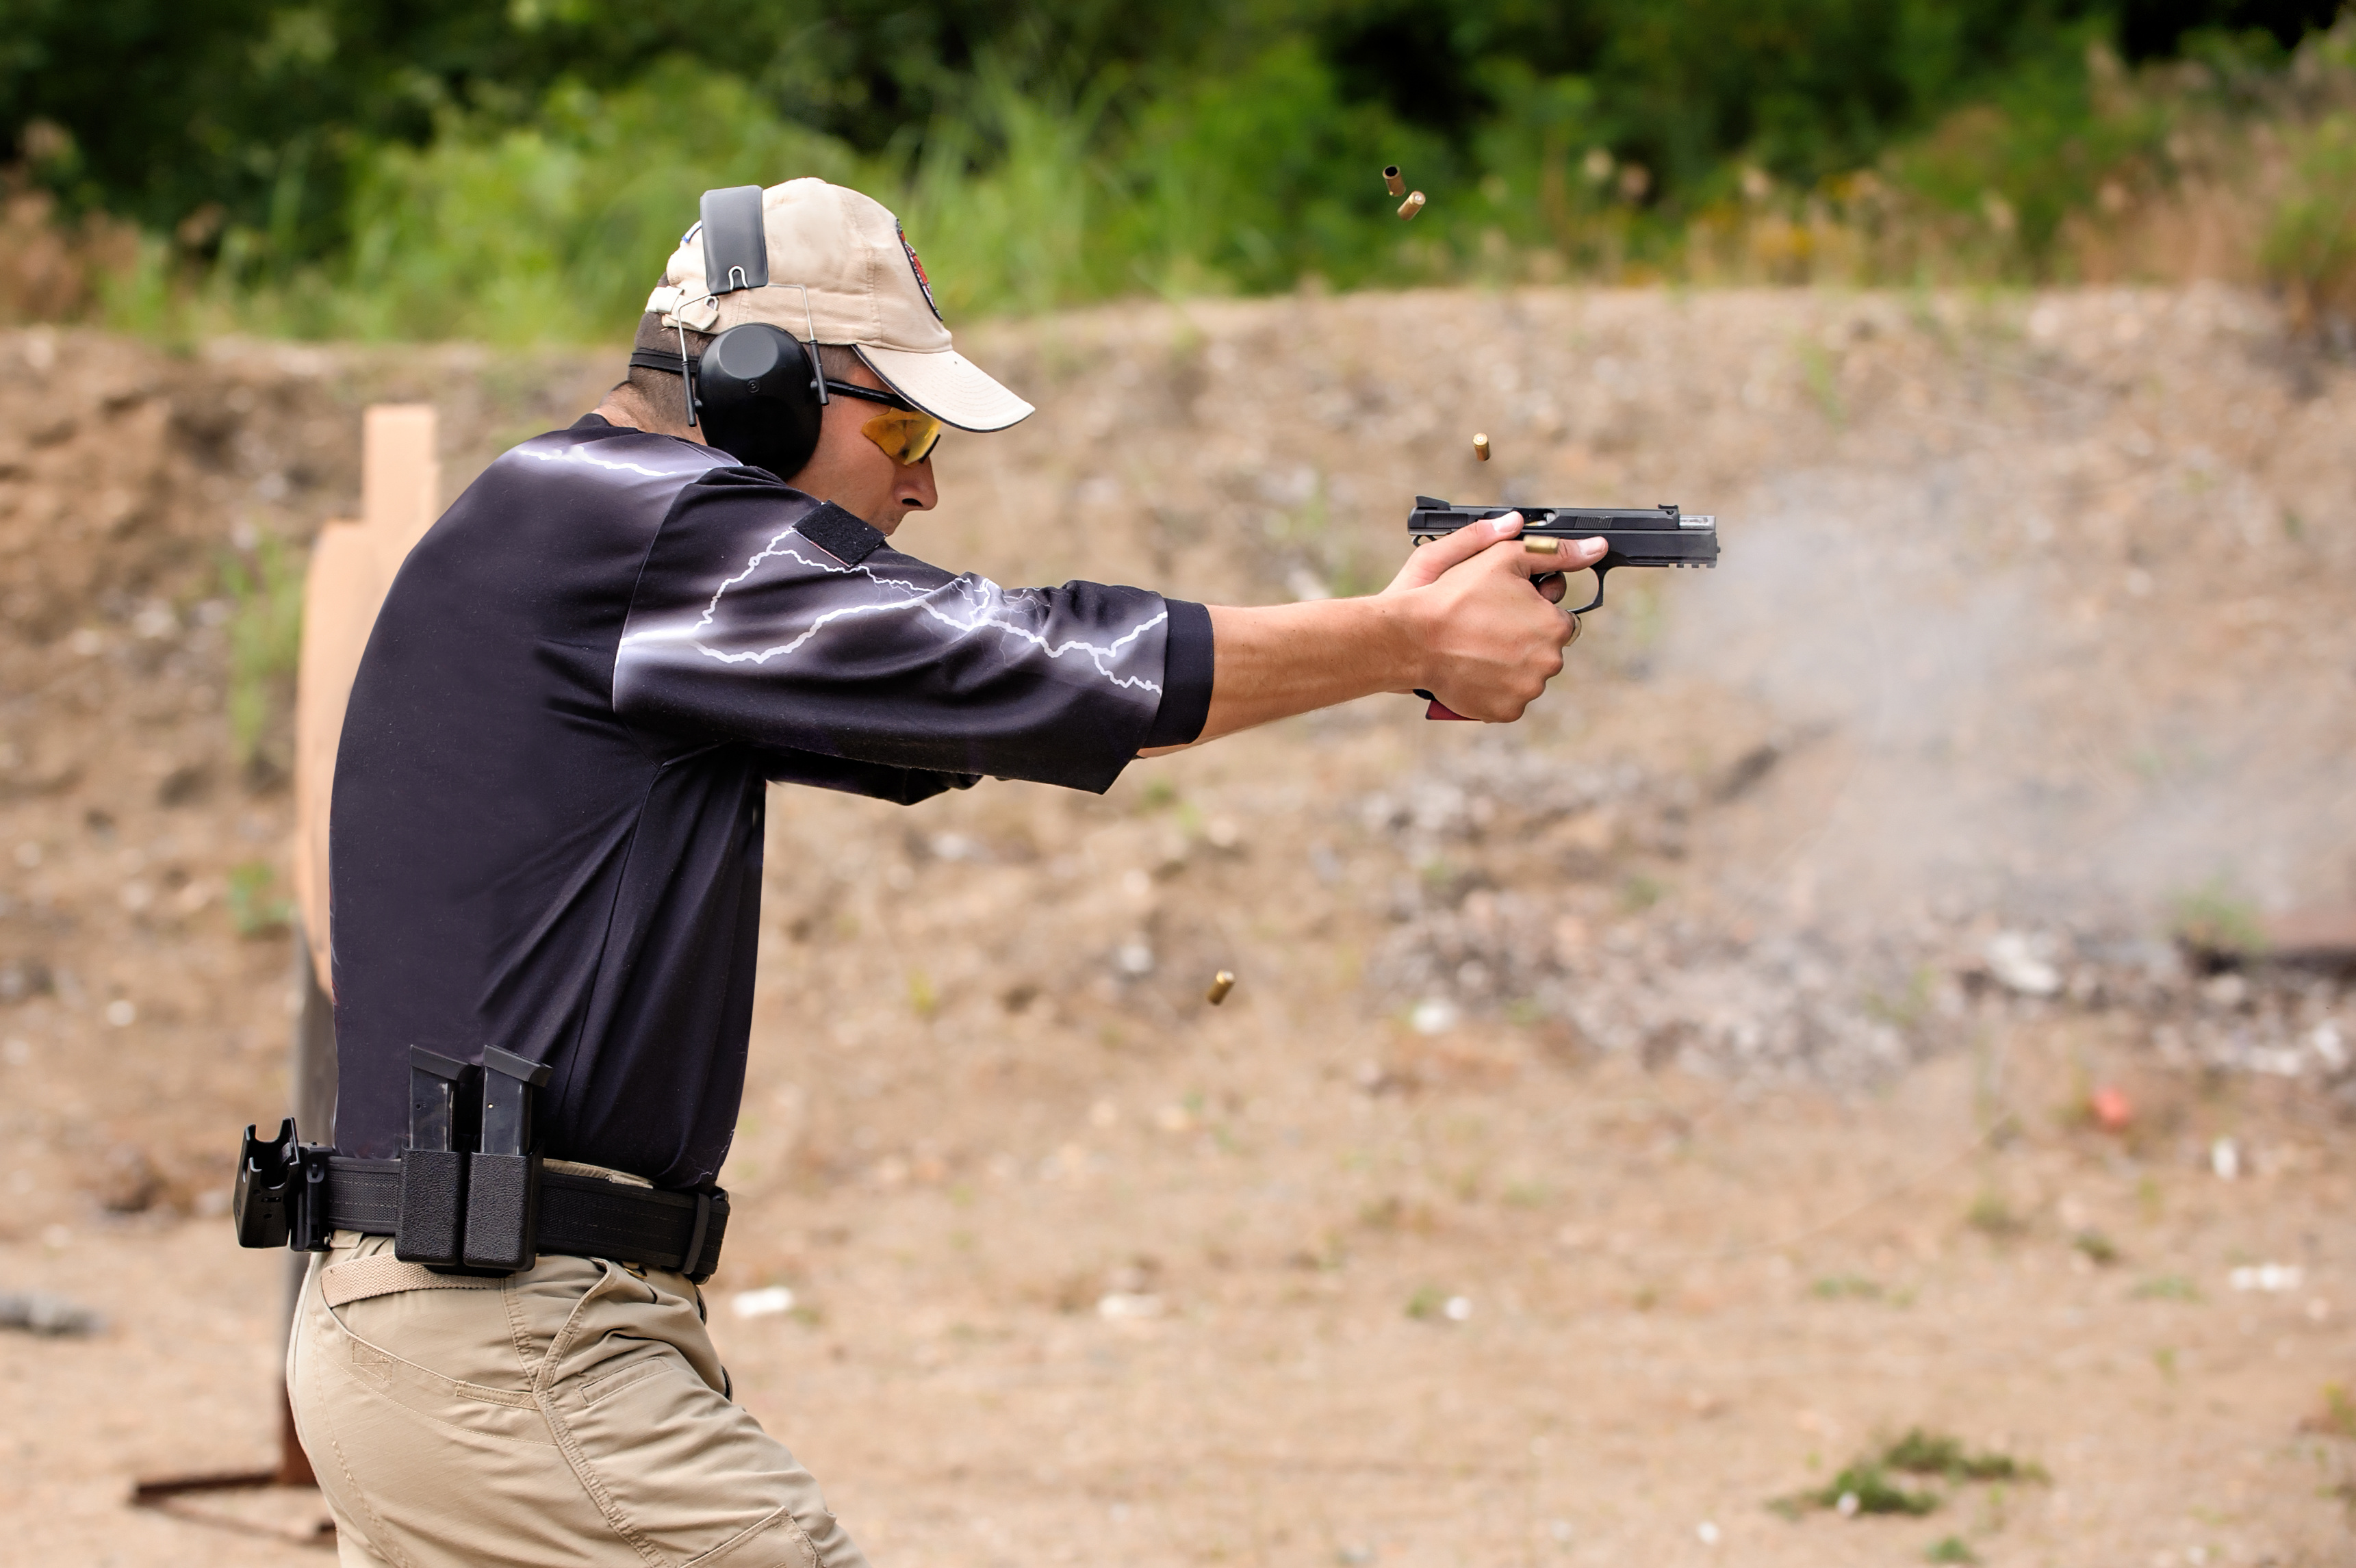 How To Start Shooting Competatively